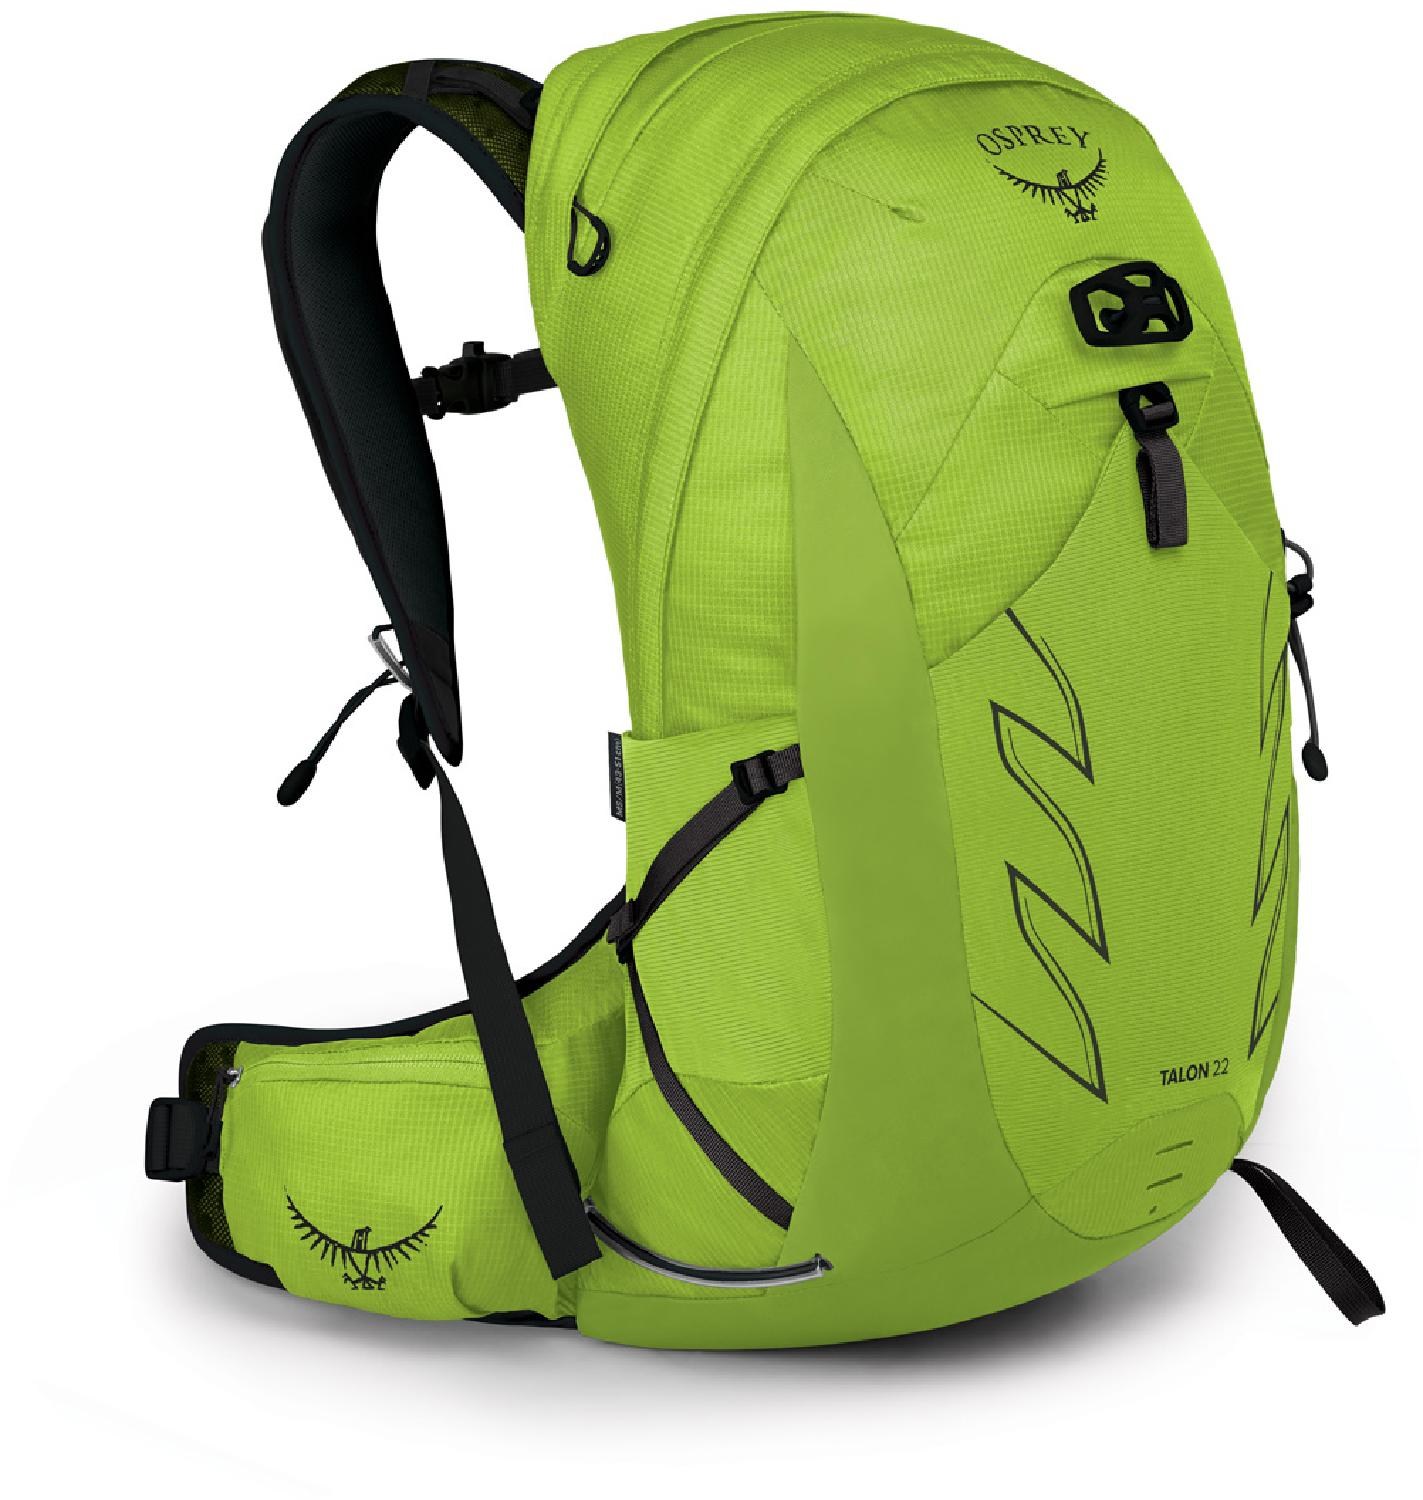 The Best Day-Hiking Backpacks of 2022